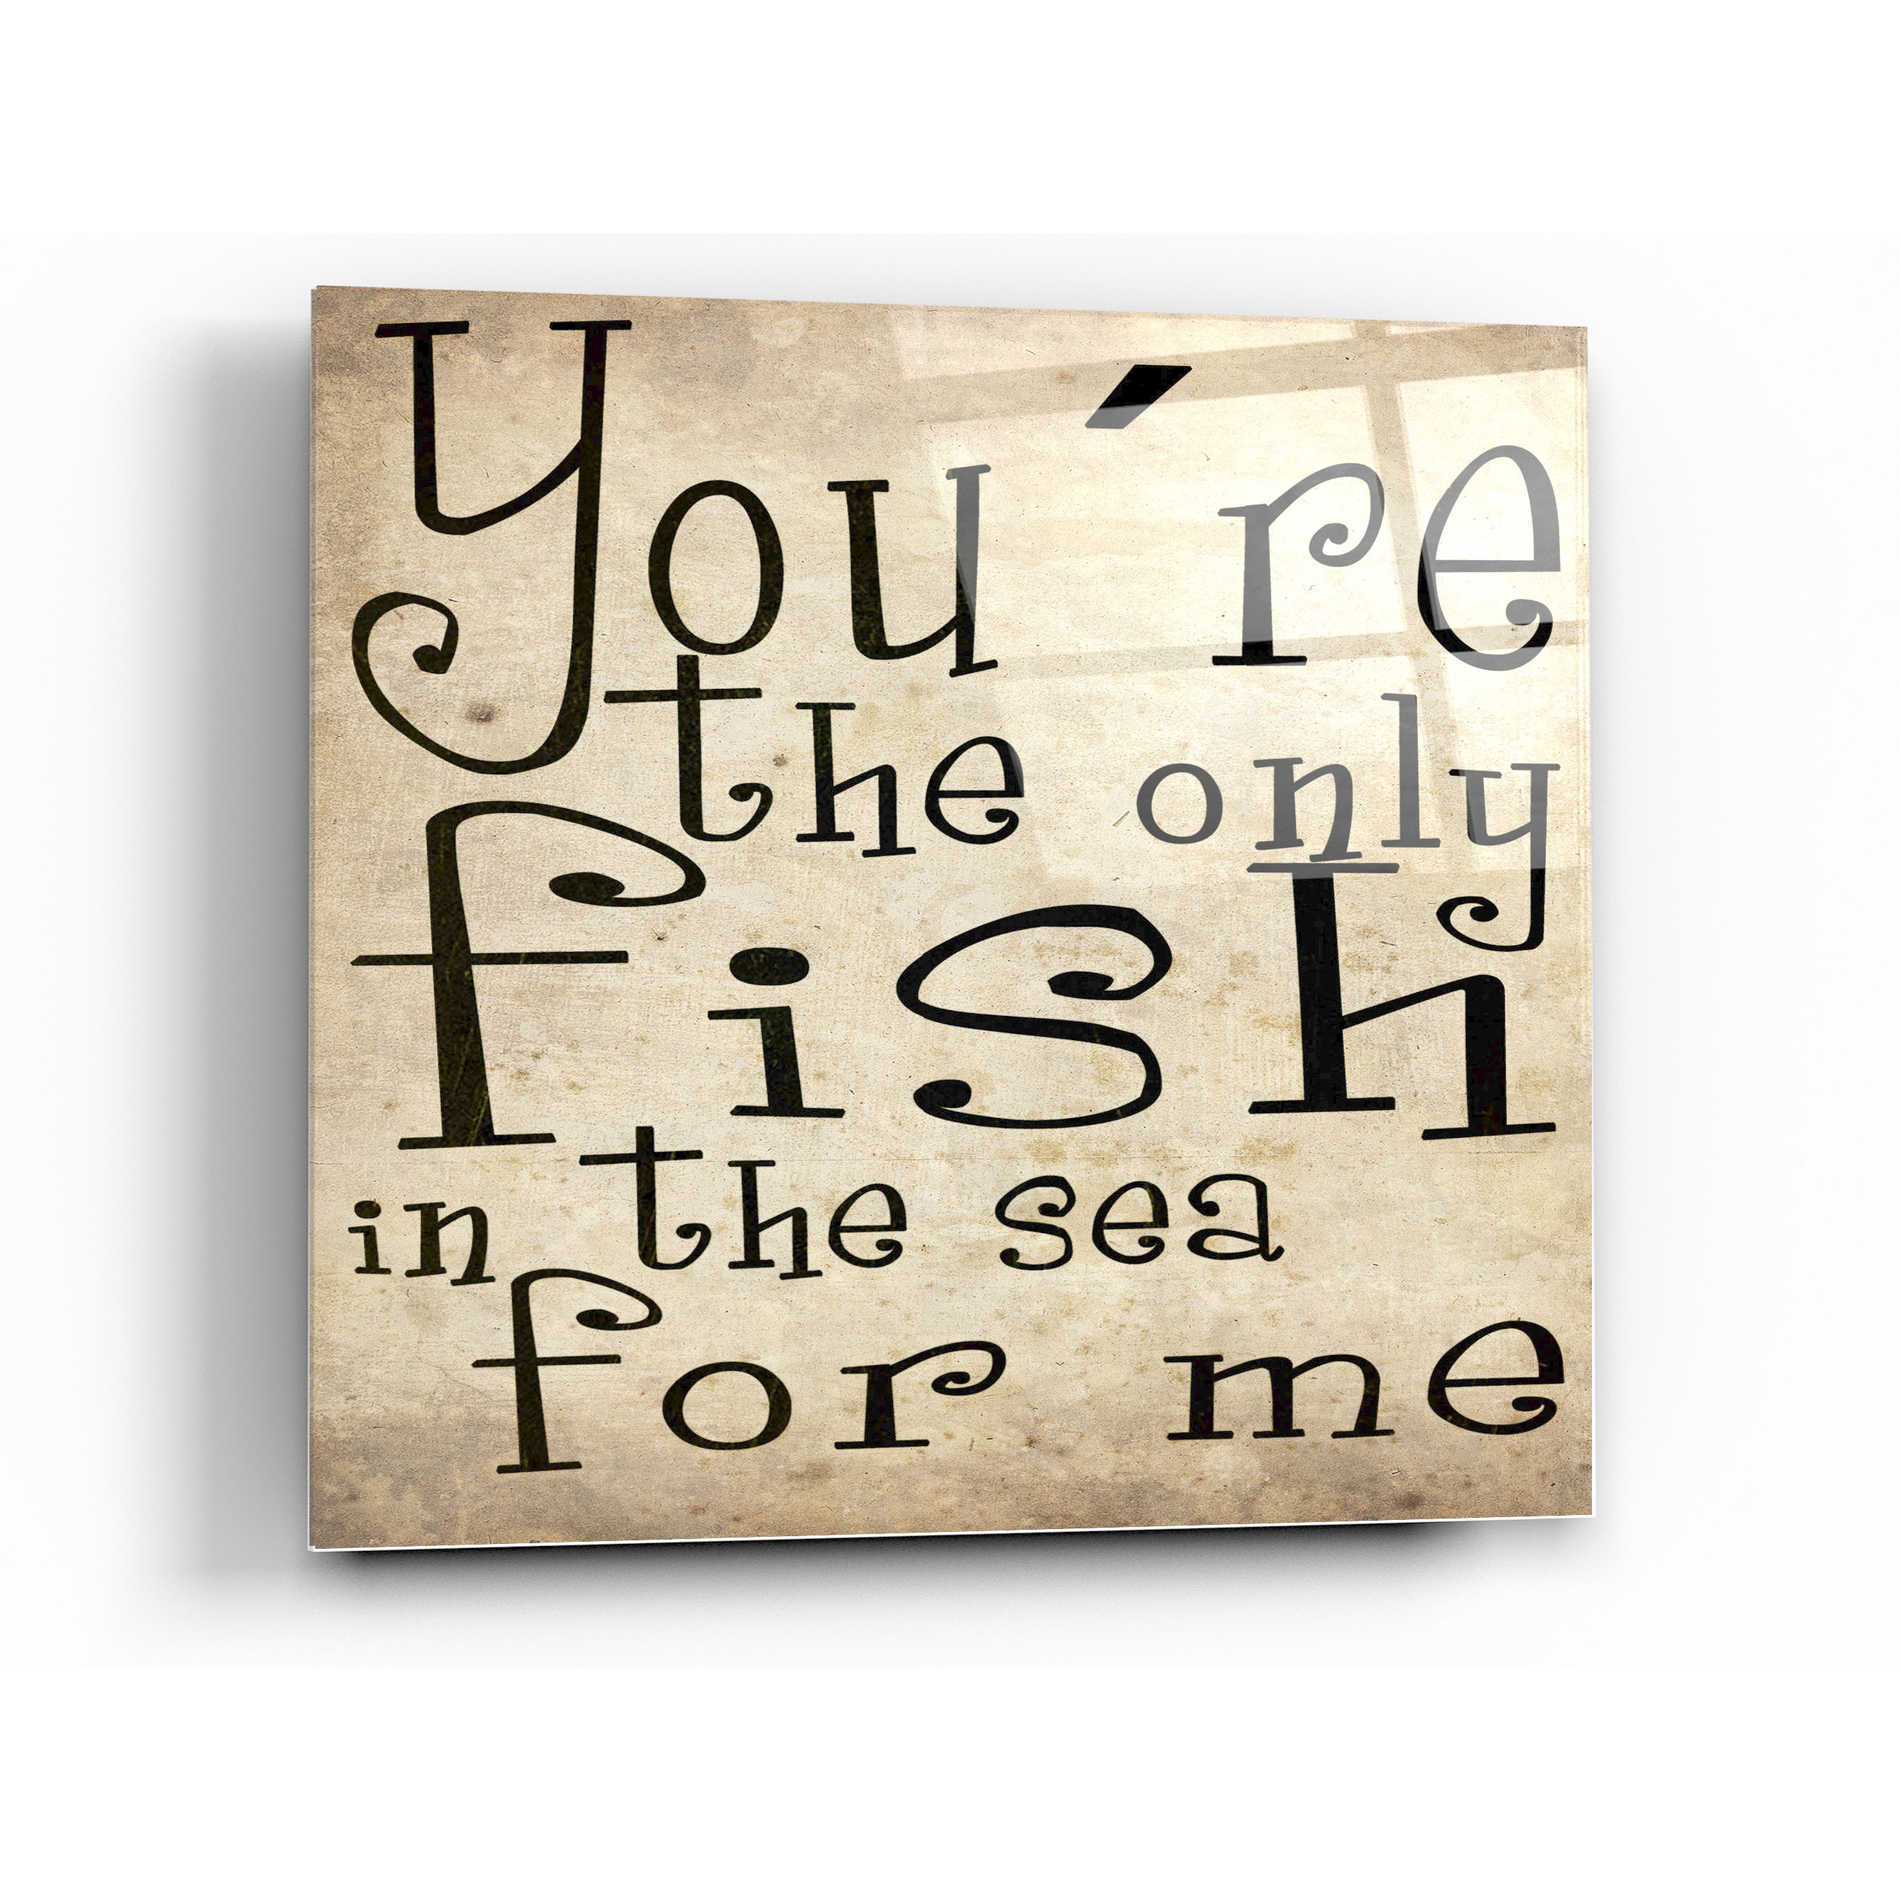 Epic Art 'You're The Only Fish In The Sea' by Nicklas Gustafsson, Acrylic Glass Wall Art,12x12